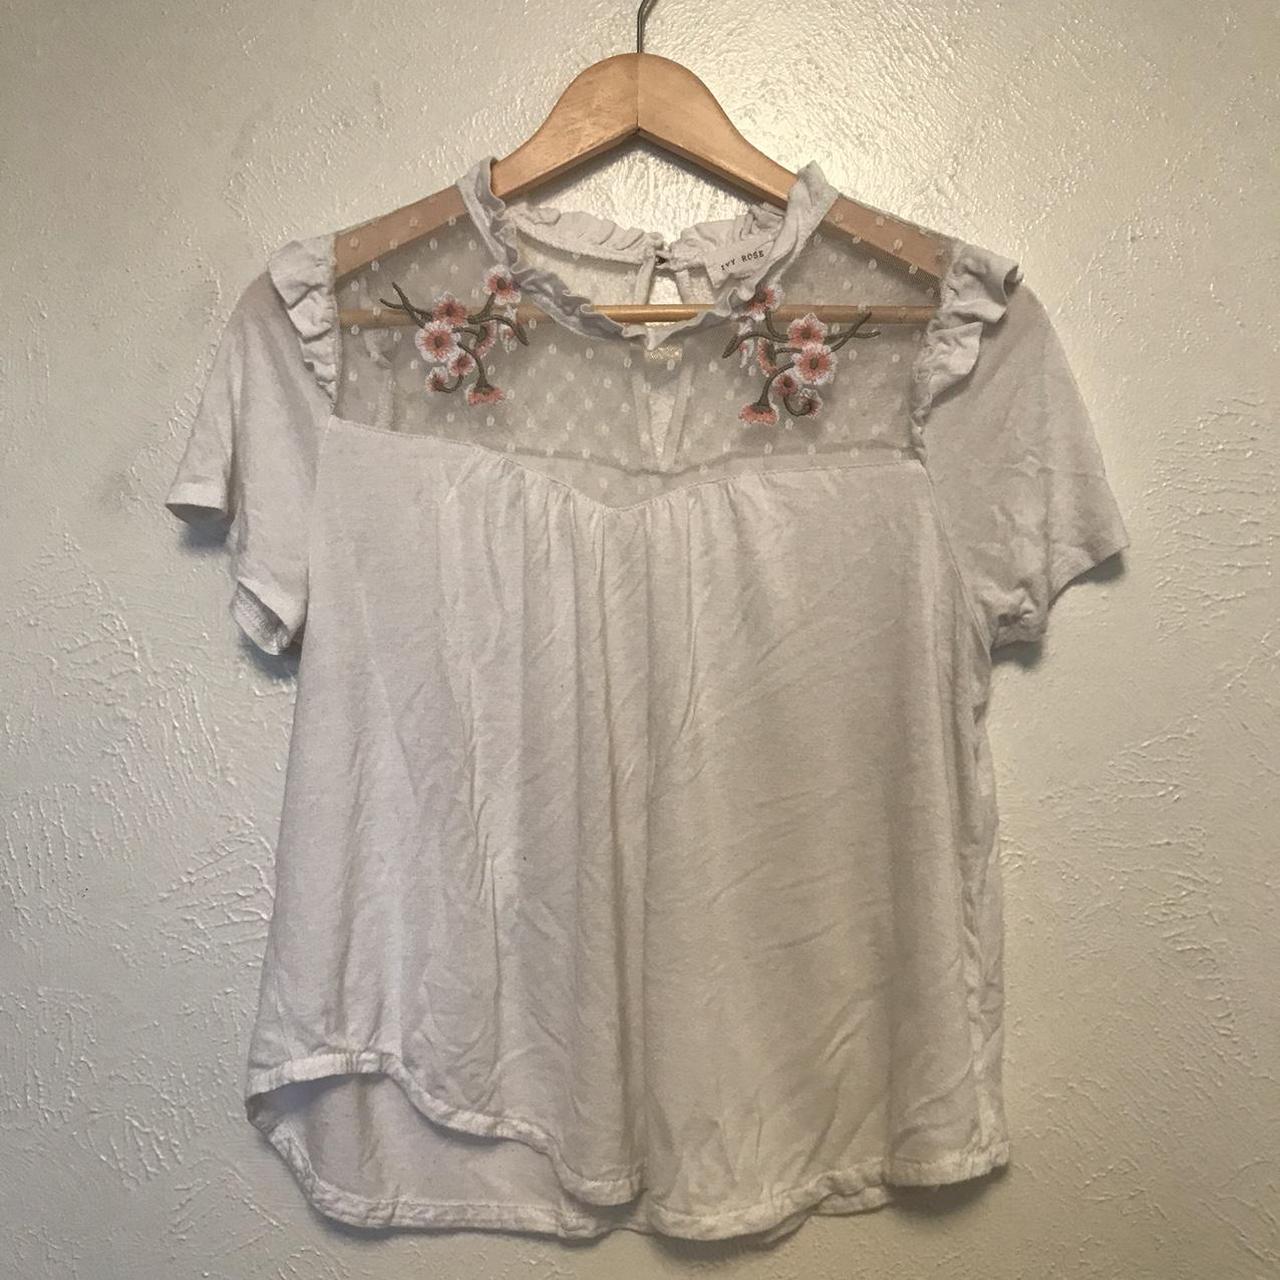 Super cute Ivy Rose lace top shirt! This is super... - Depop